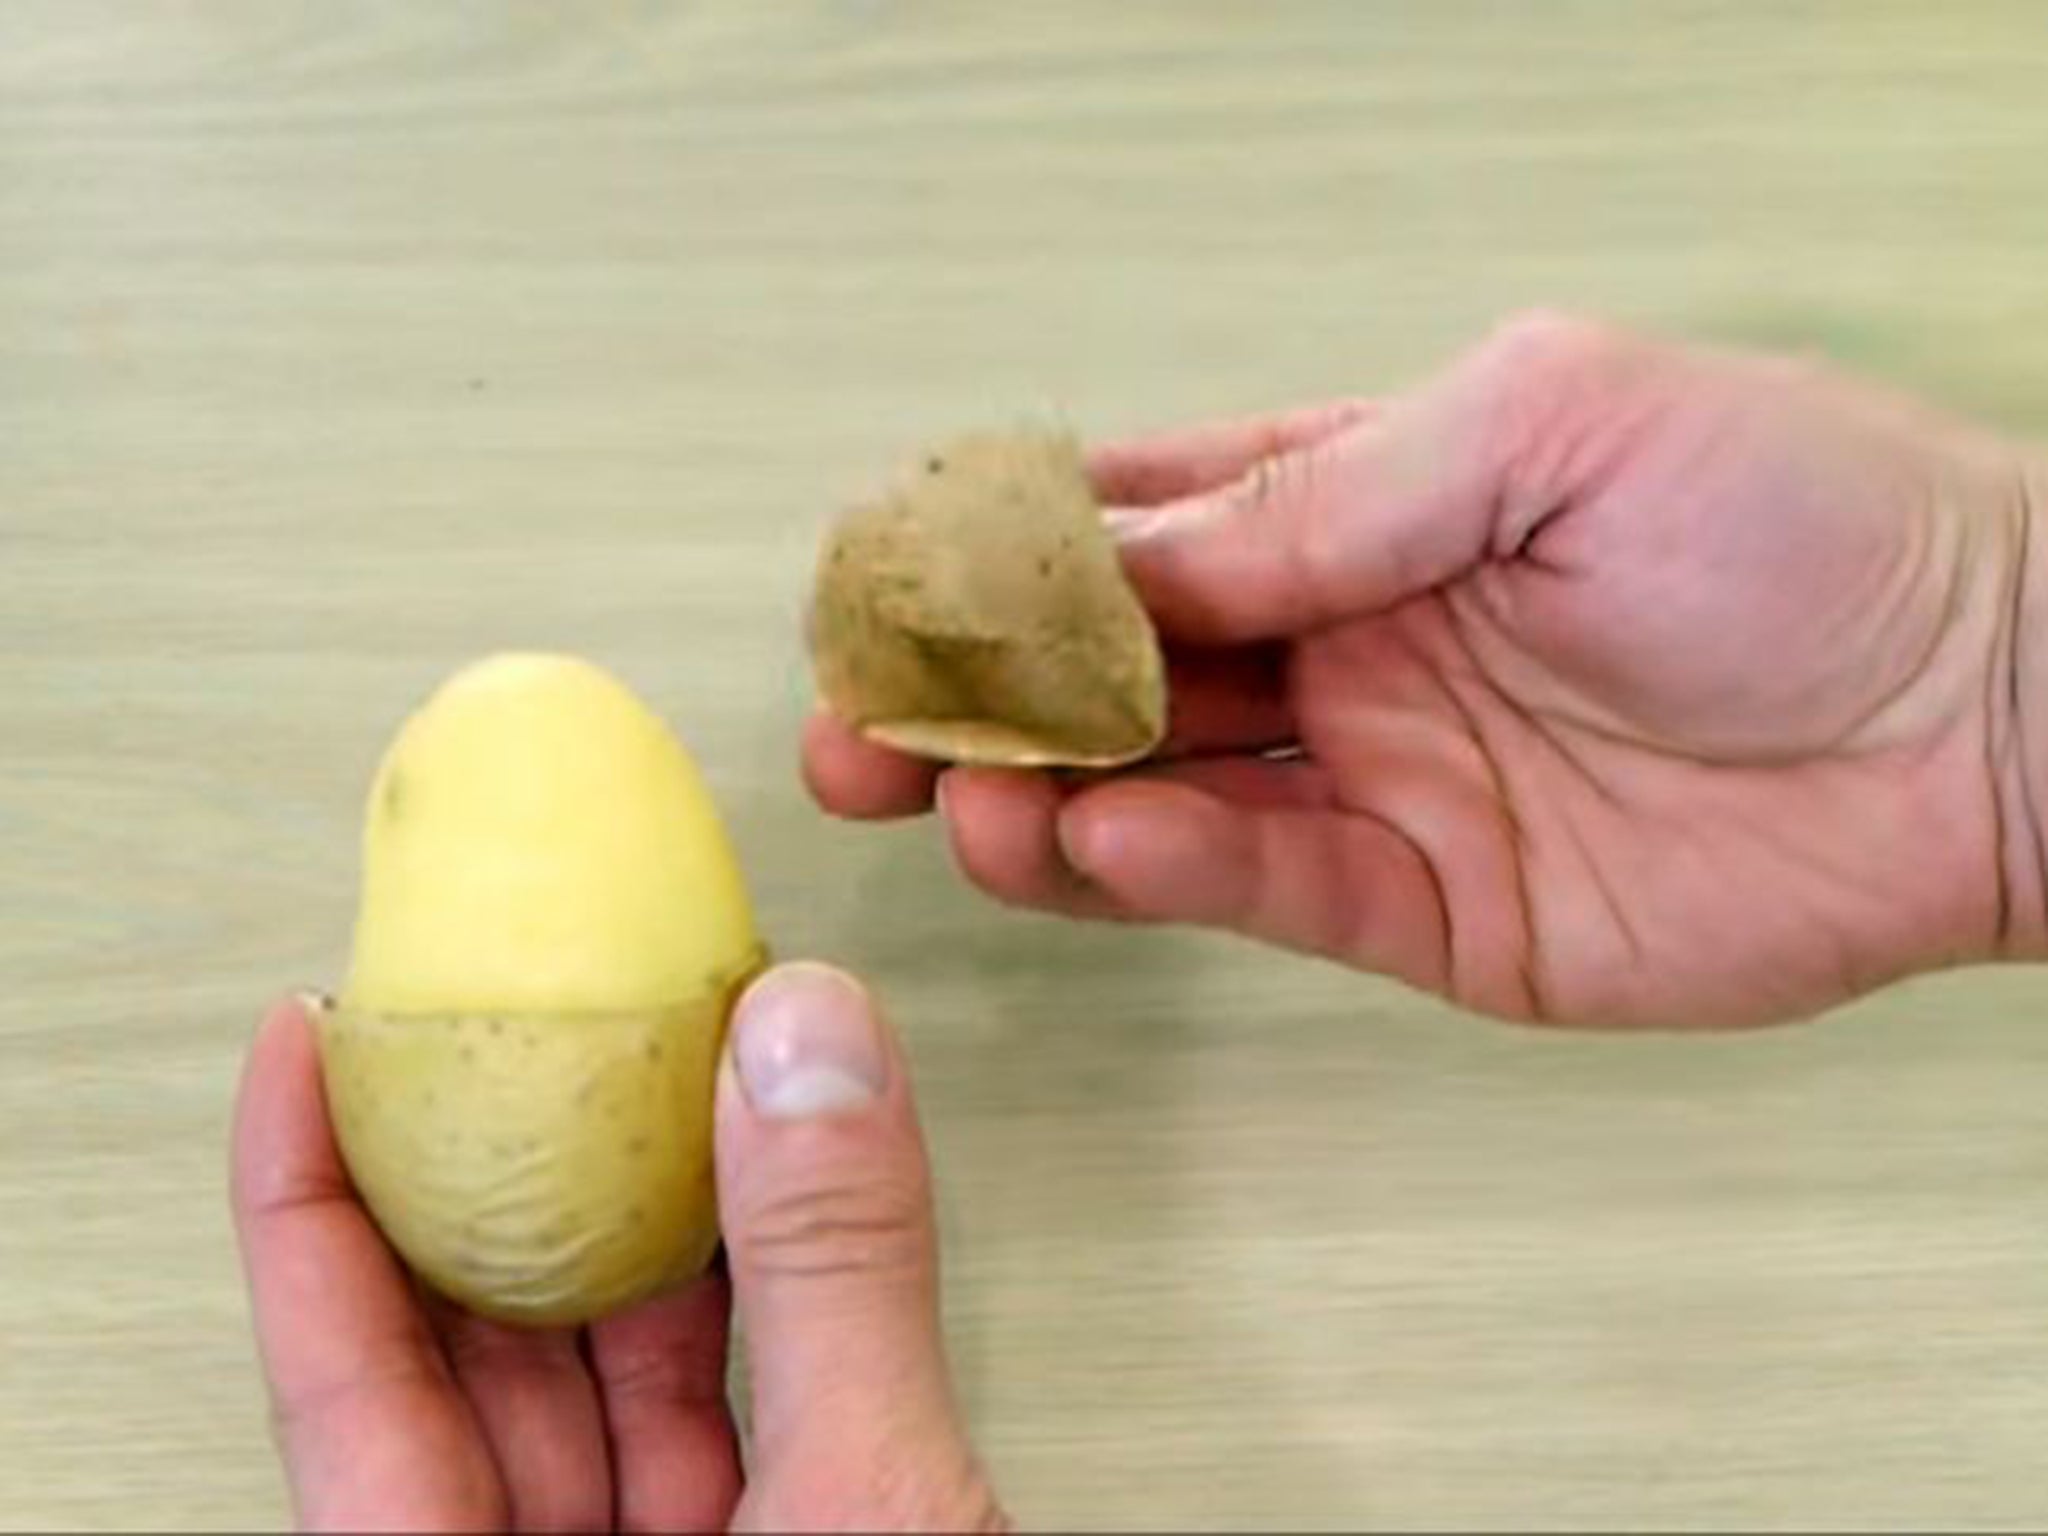 An easy-peel potato; Dave Hax has come up with an ingenious method in food preparation